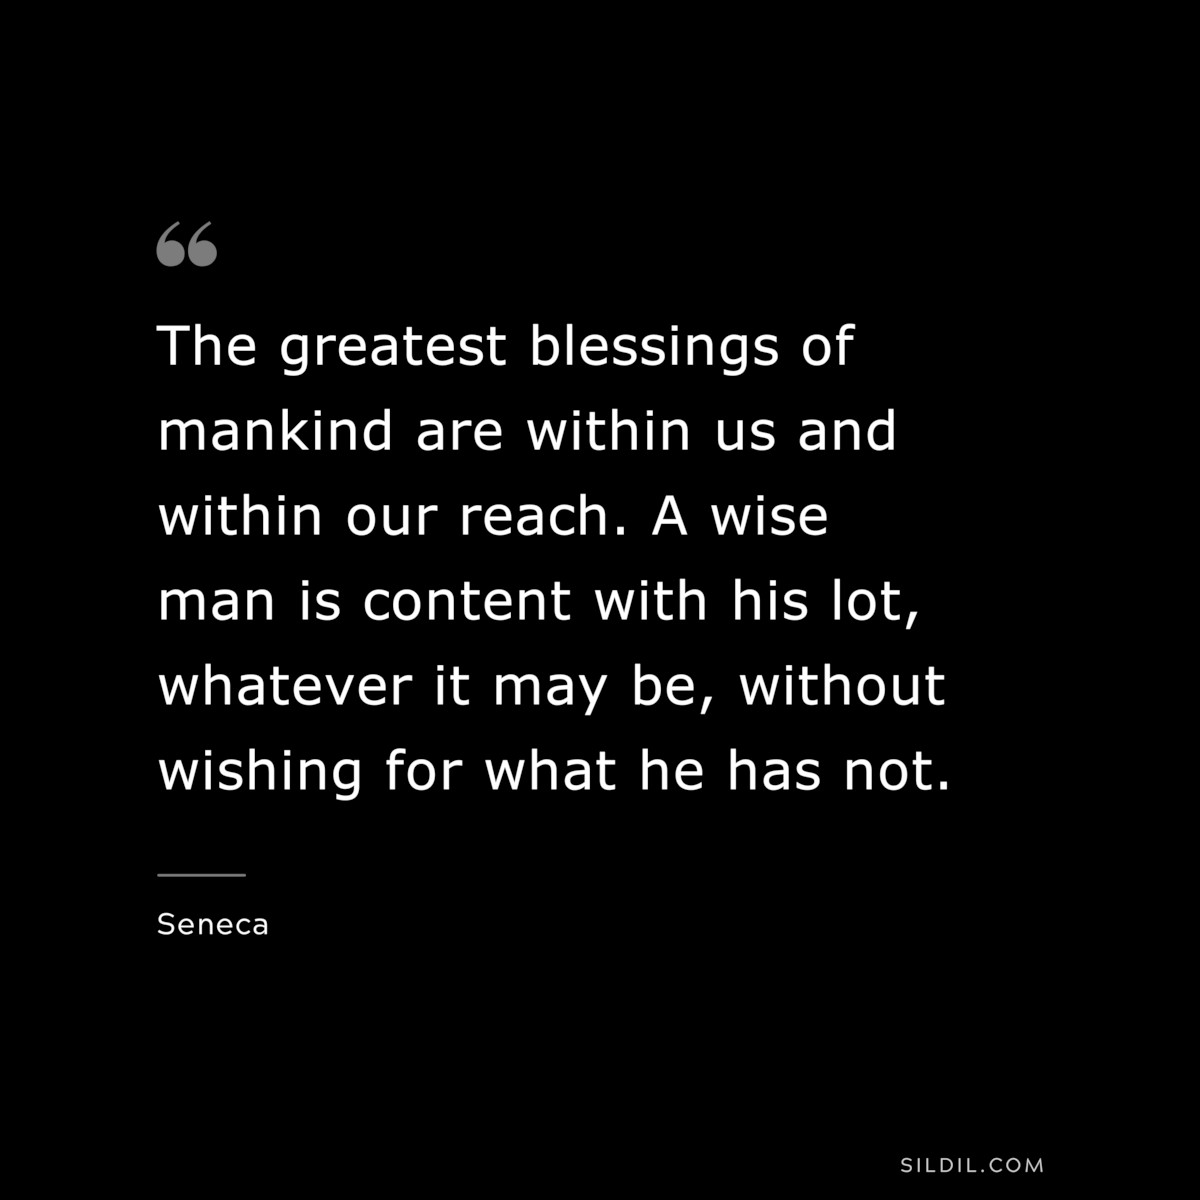 The greatest blessings of mankind are within us and within our reach. A wise man is content with his lot, whatever it may be, without wishing for what he has not. ― Seneca